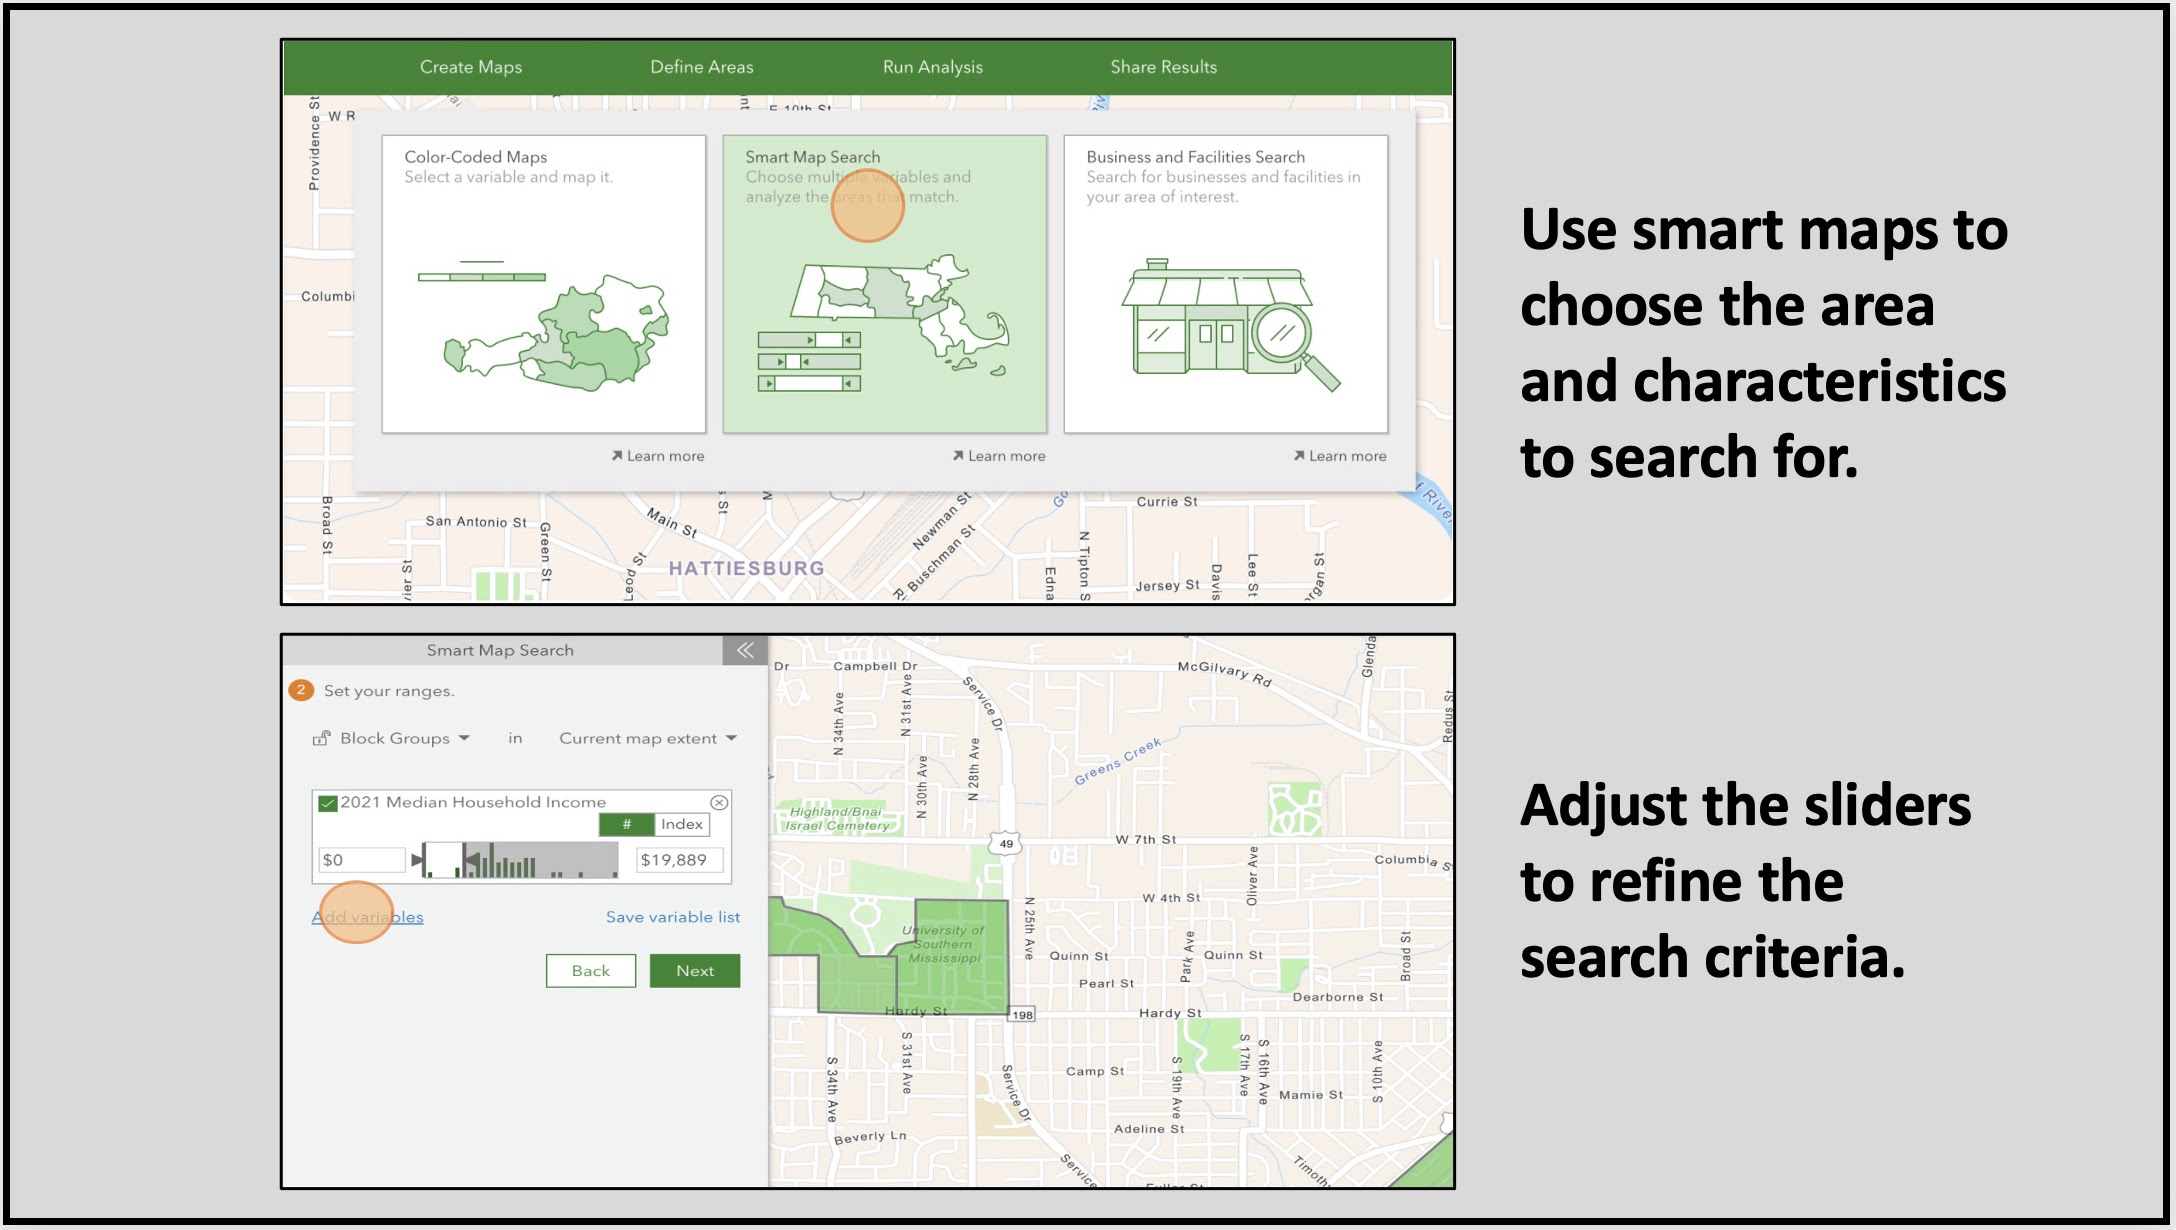 Choose the area and socio-economic criteria to search on. Adjust the sliders to refine the search.